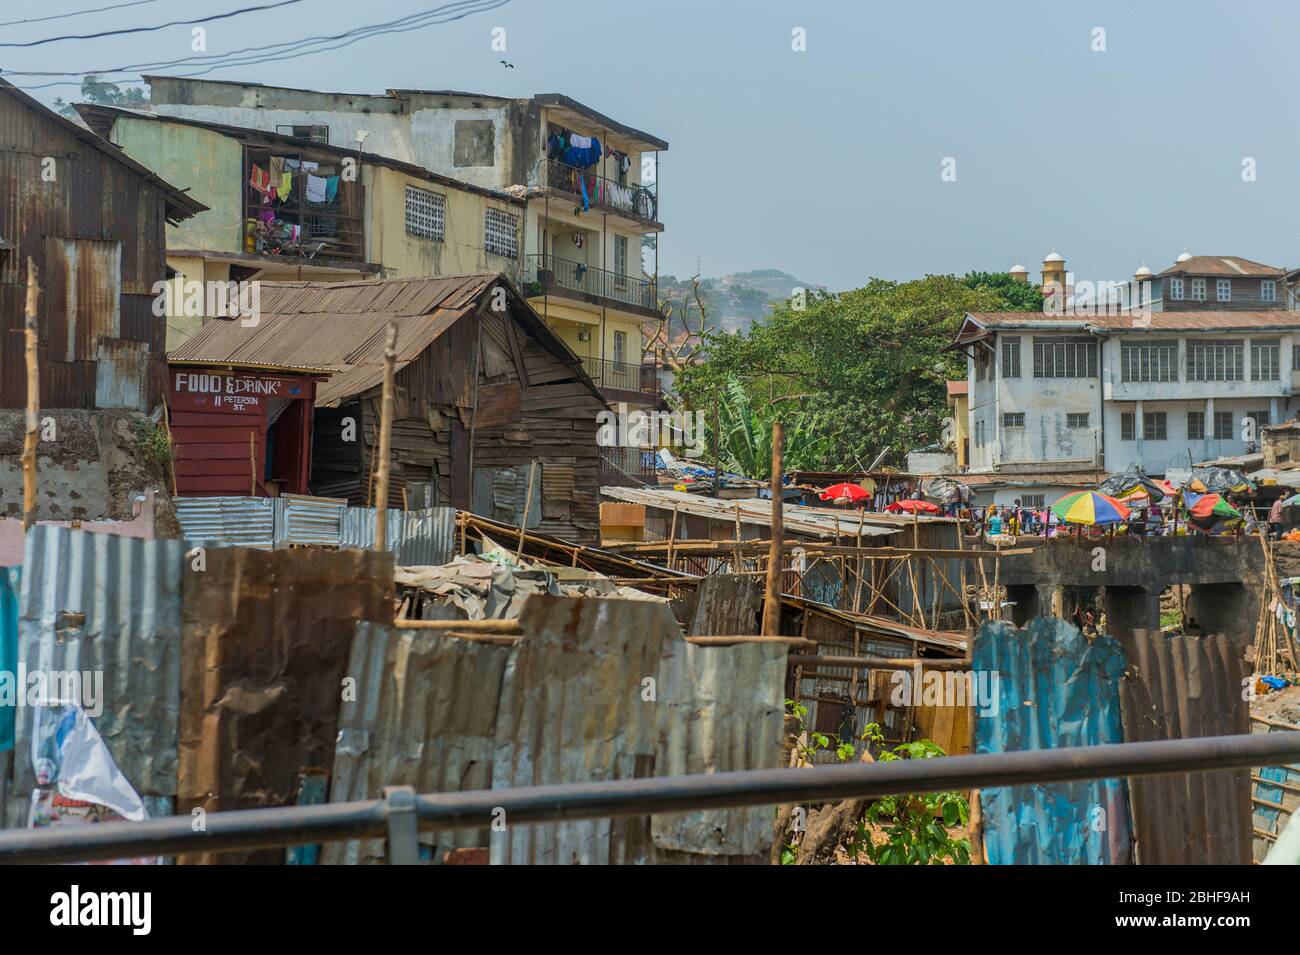 Street scene with huts and houses in Freetown, Sierra Leone. Stock Photo